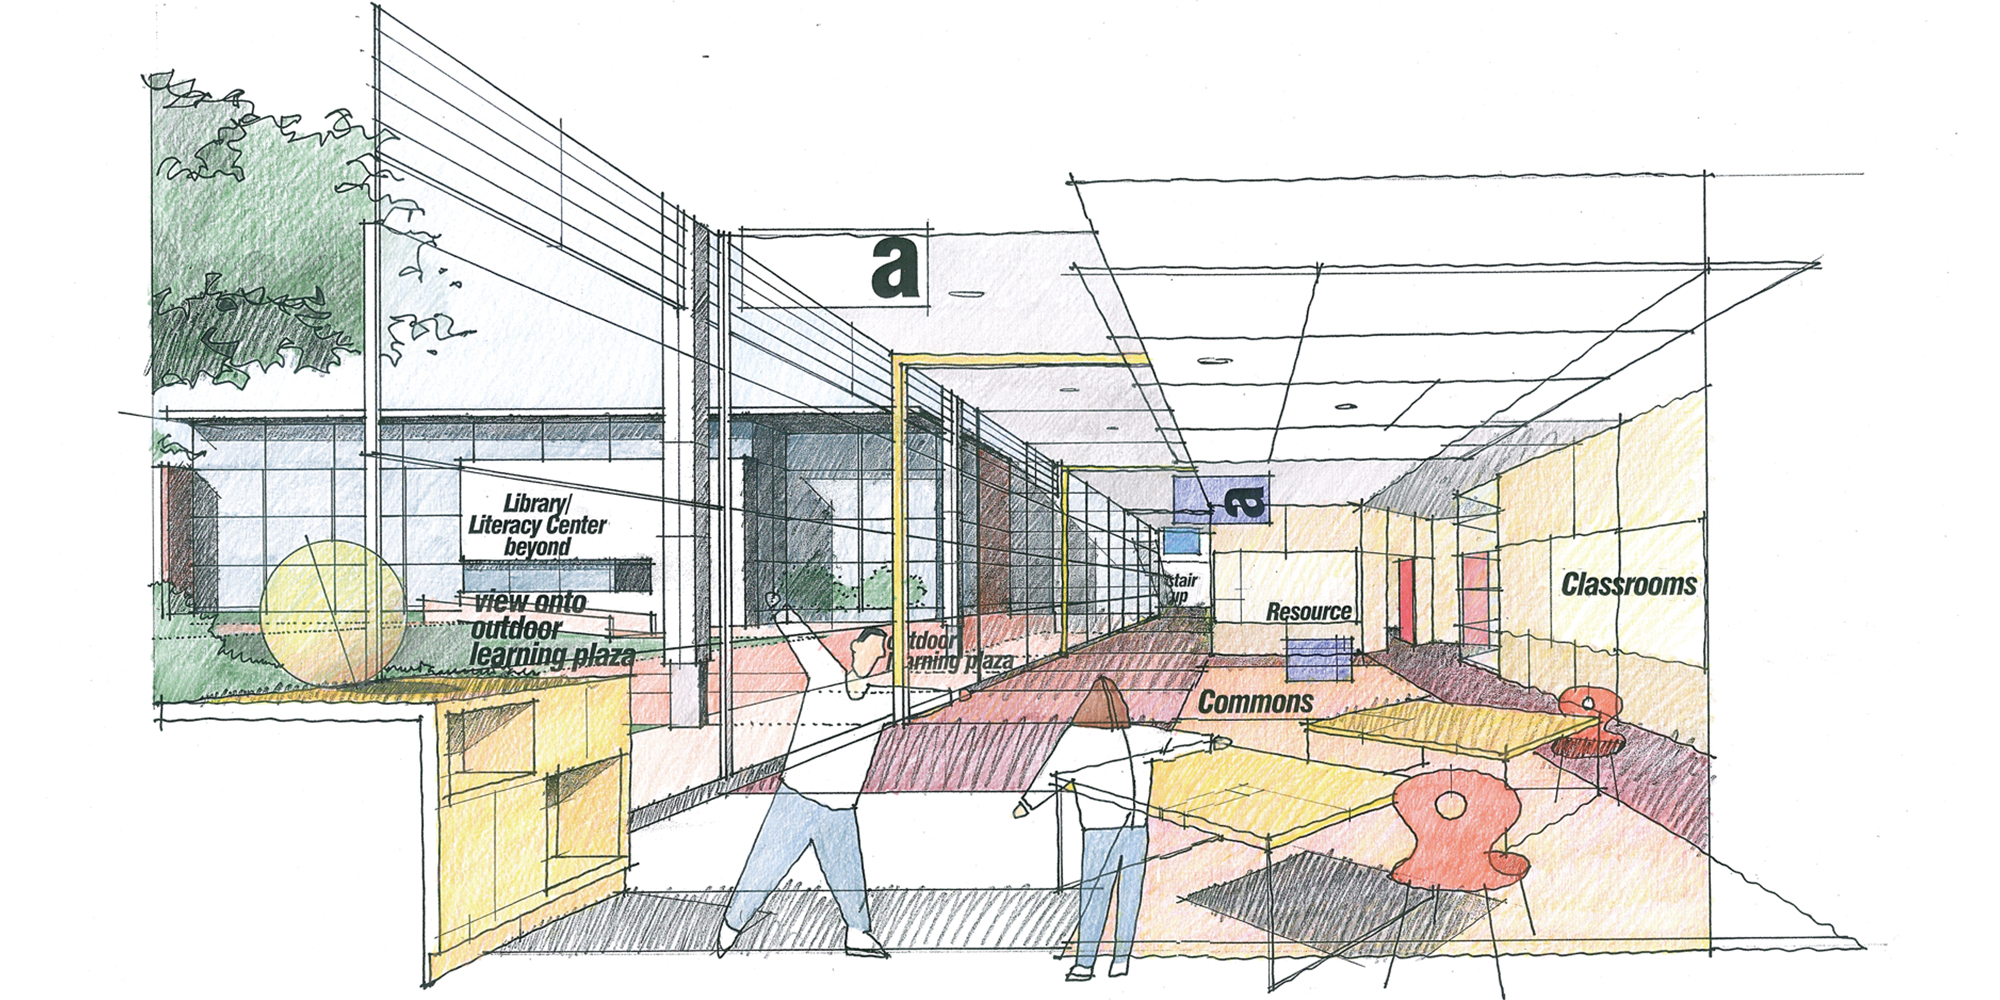 Drawing of Rosa Parks Elementary School. For full text please download our project PDF below